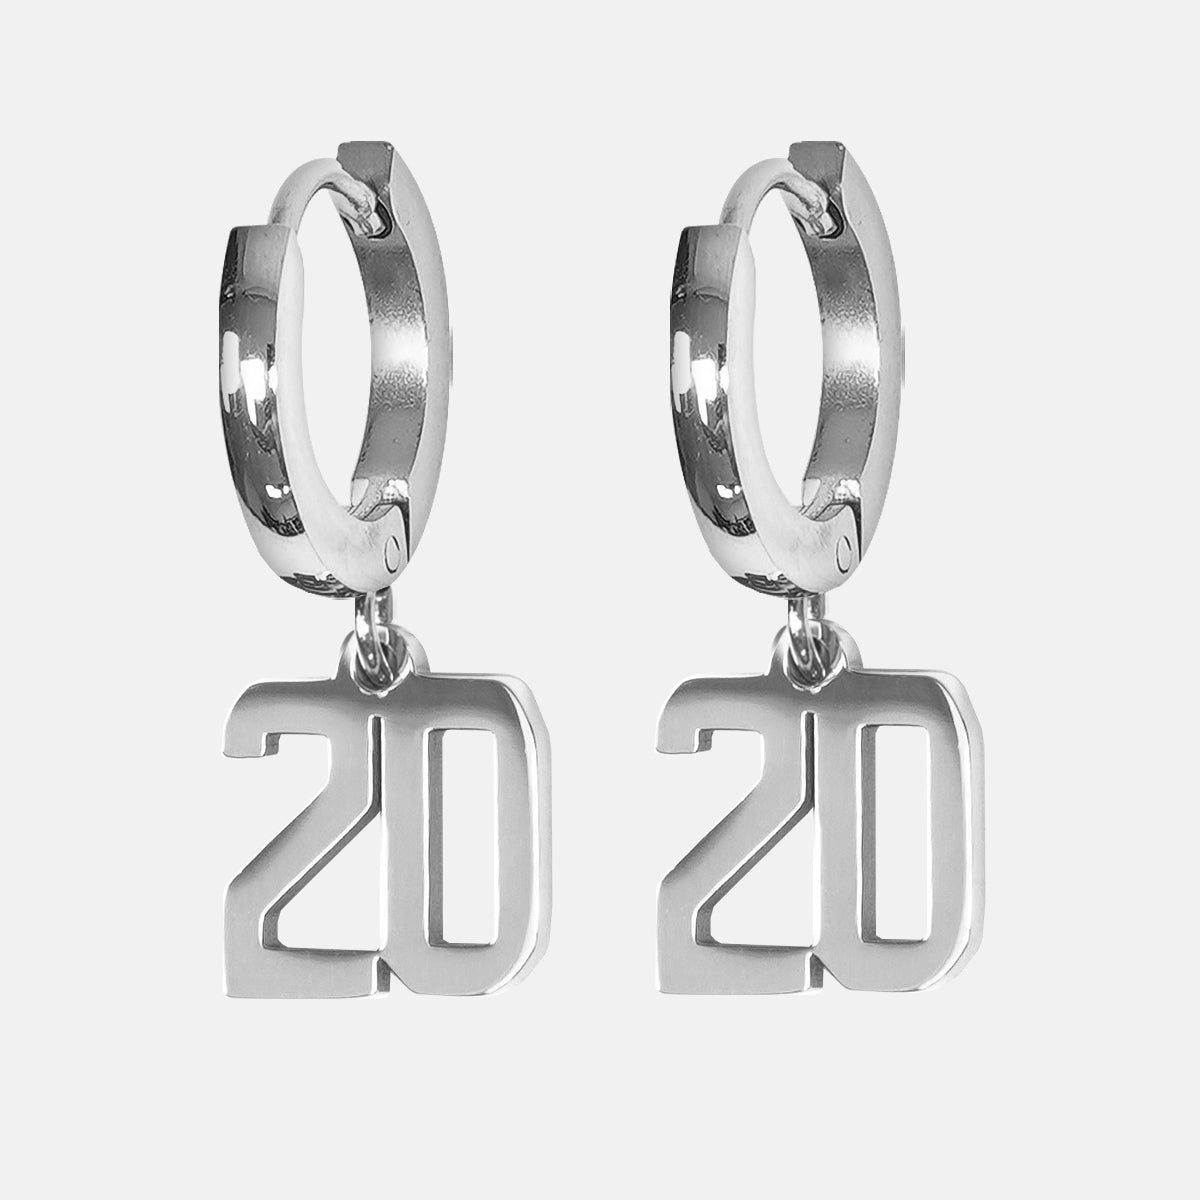 20 Number Earring - Stainless Steel